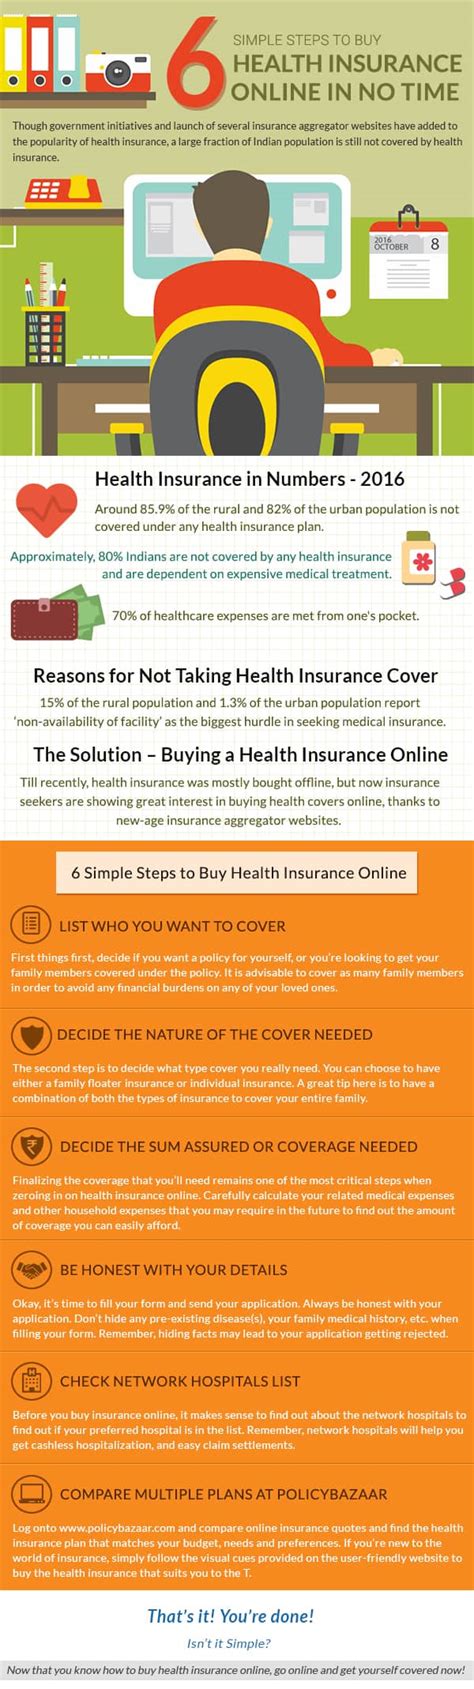 Target loss ratio (tlr) is an important metric that health insurance companies look at to determine your pricing going forward. Health Insurance Plans | Medical Insurance Plans